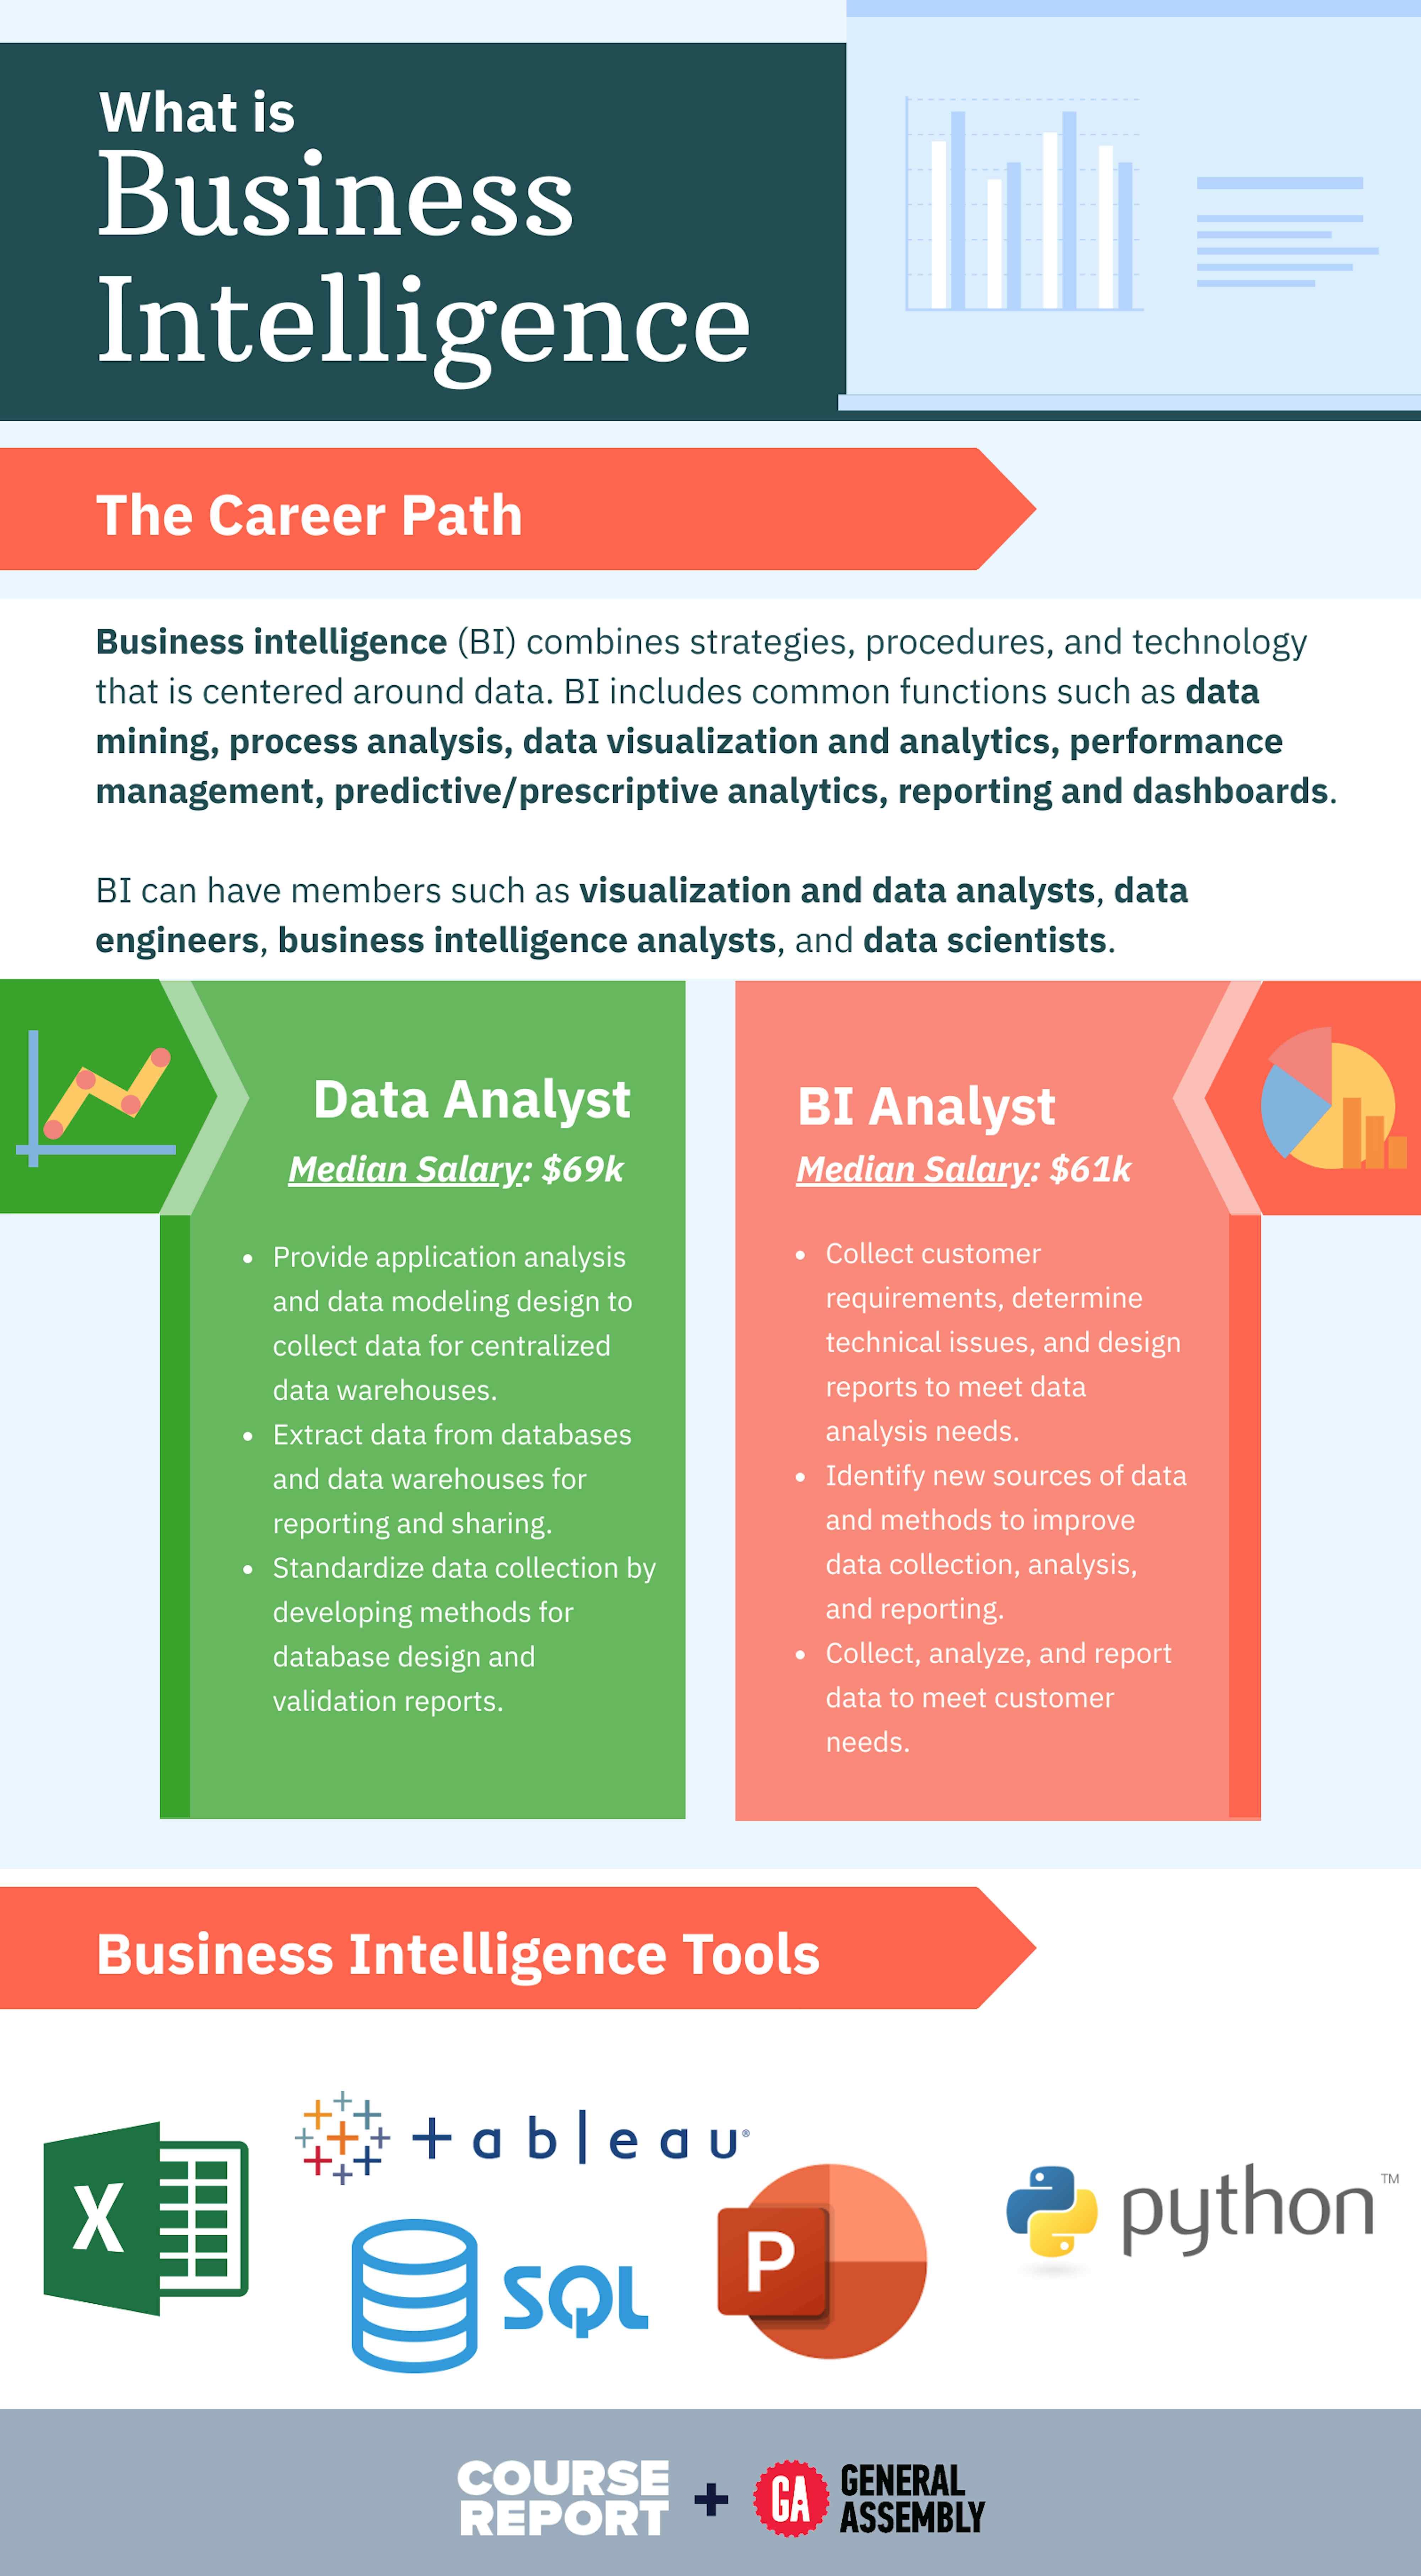 assignment business intelligence